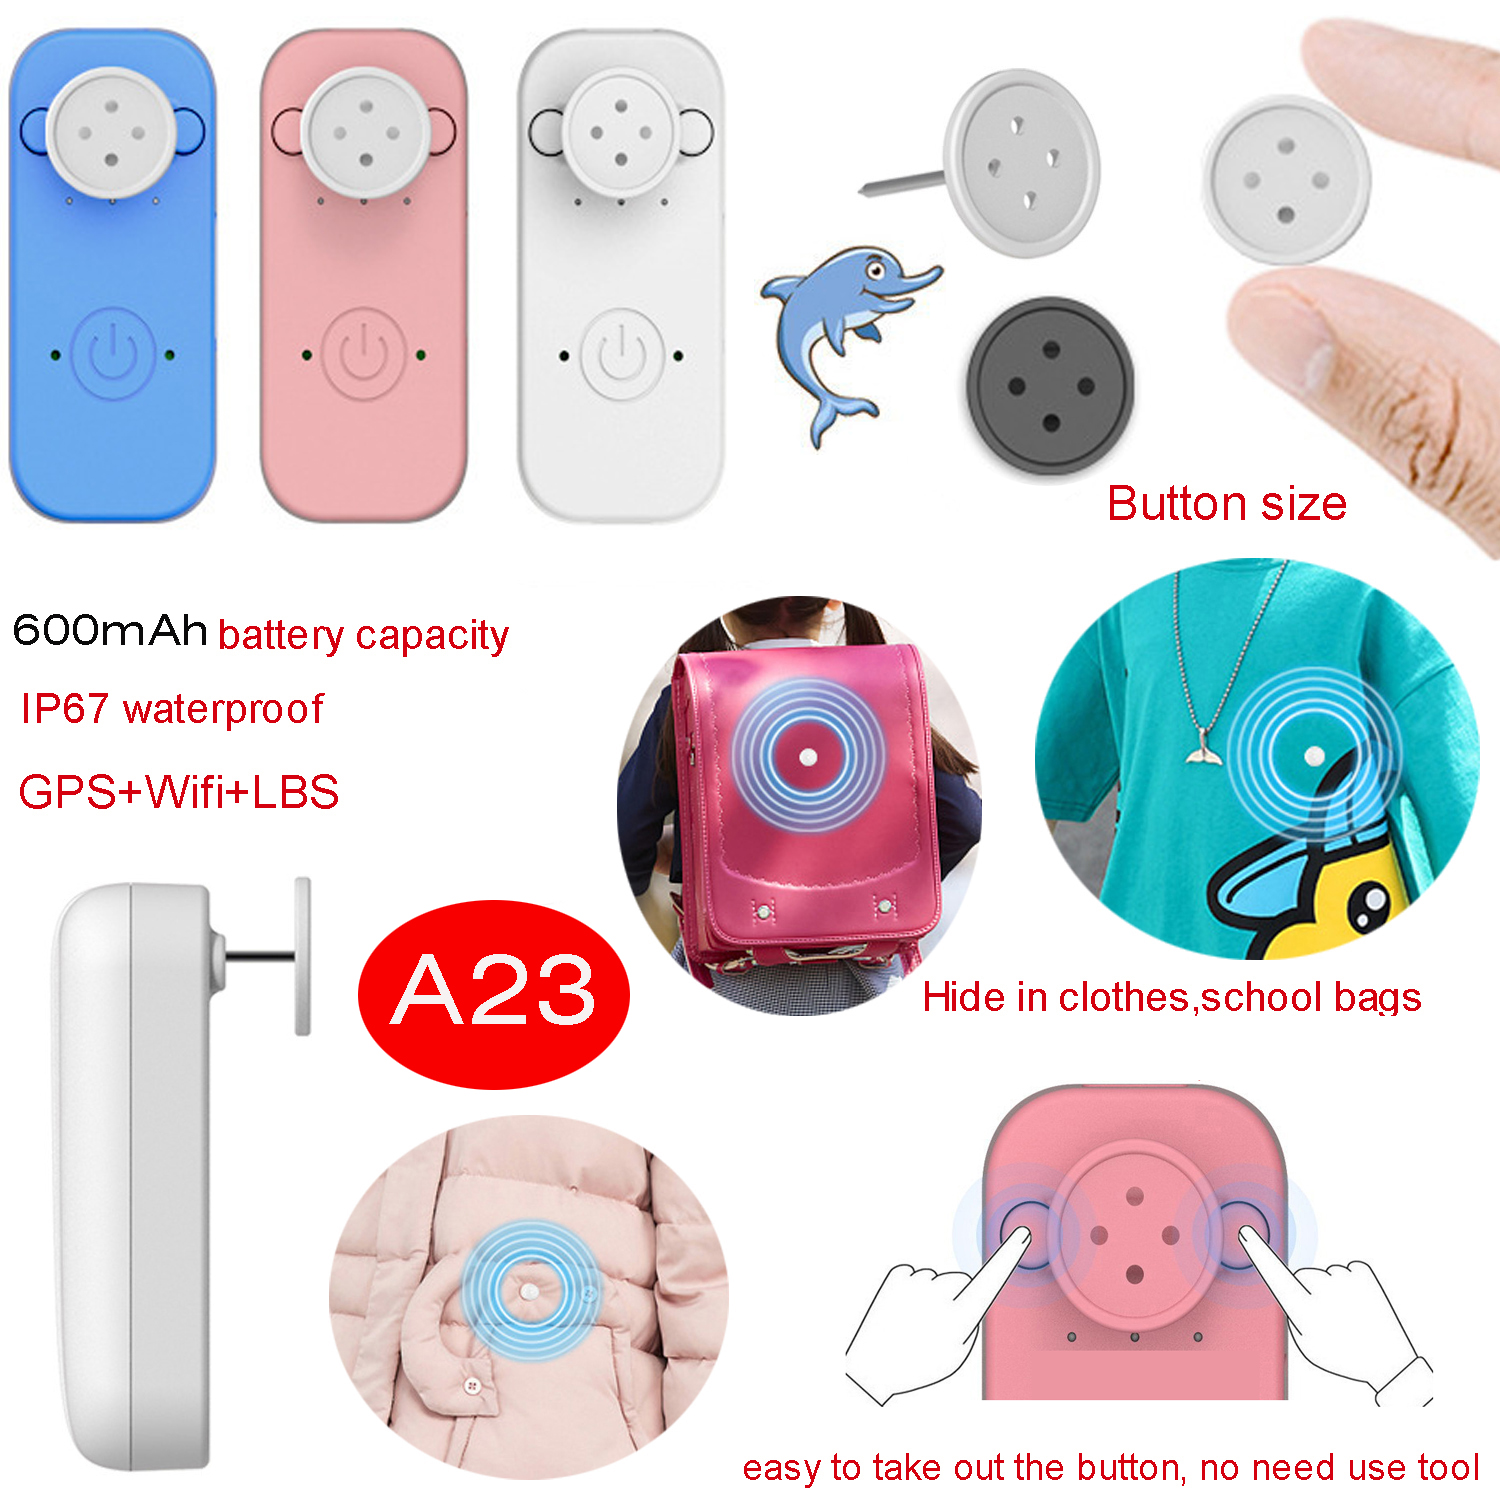 New 2G IP67 Water Resistance Hidden Mini GPS Tracker with Long Battery Life SOS Emergency Help for Avoiding Kidnap A23